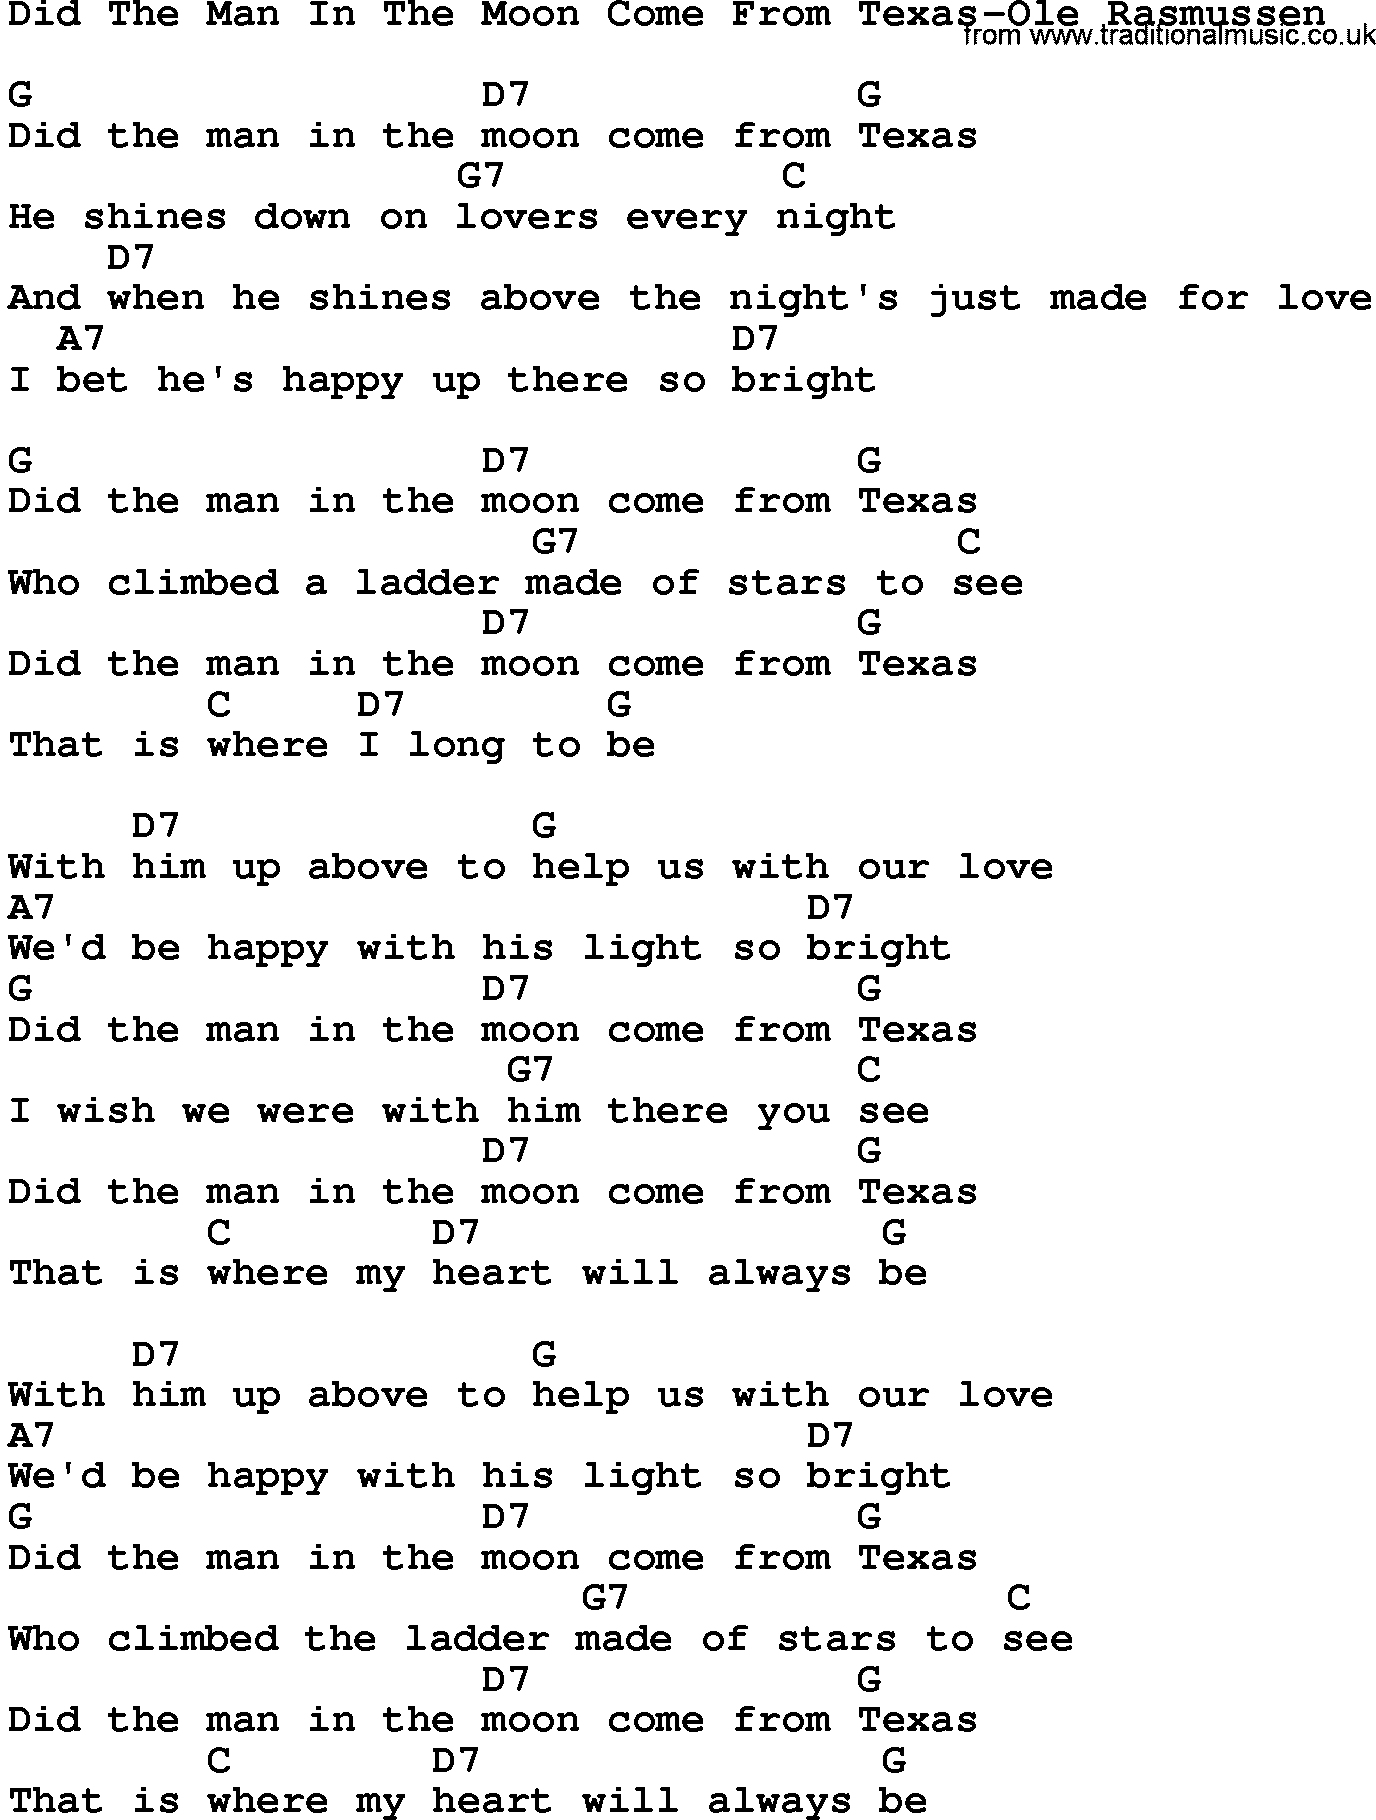 Country music song: Did The Man In The Moon Come From Texas-Ole Rasmussen lyrics and chords